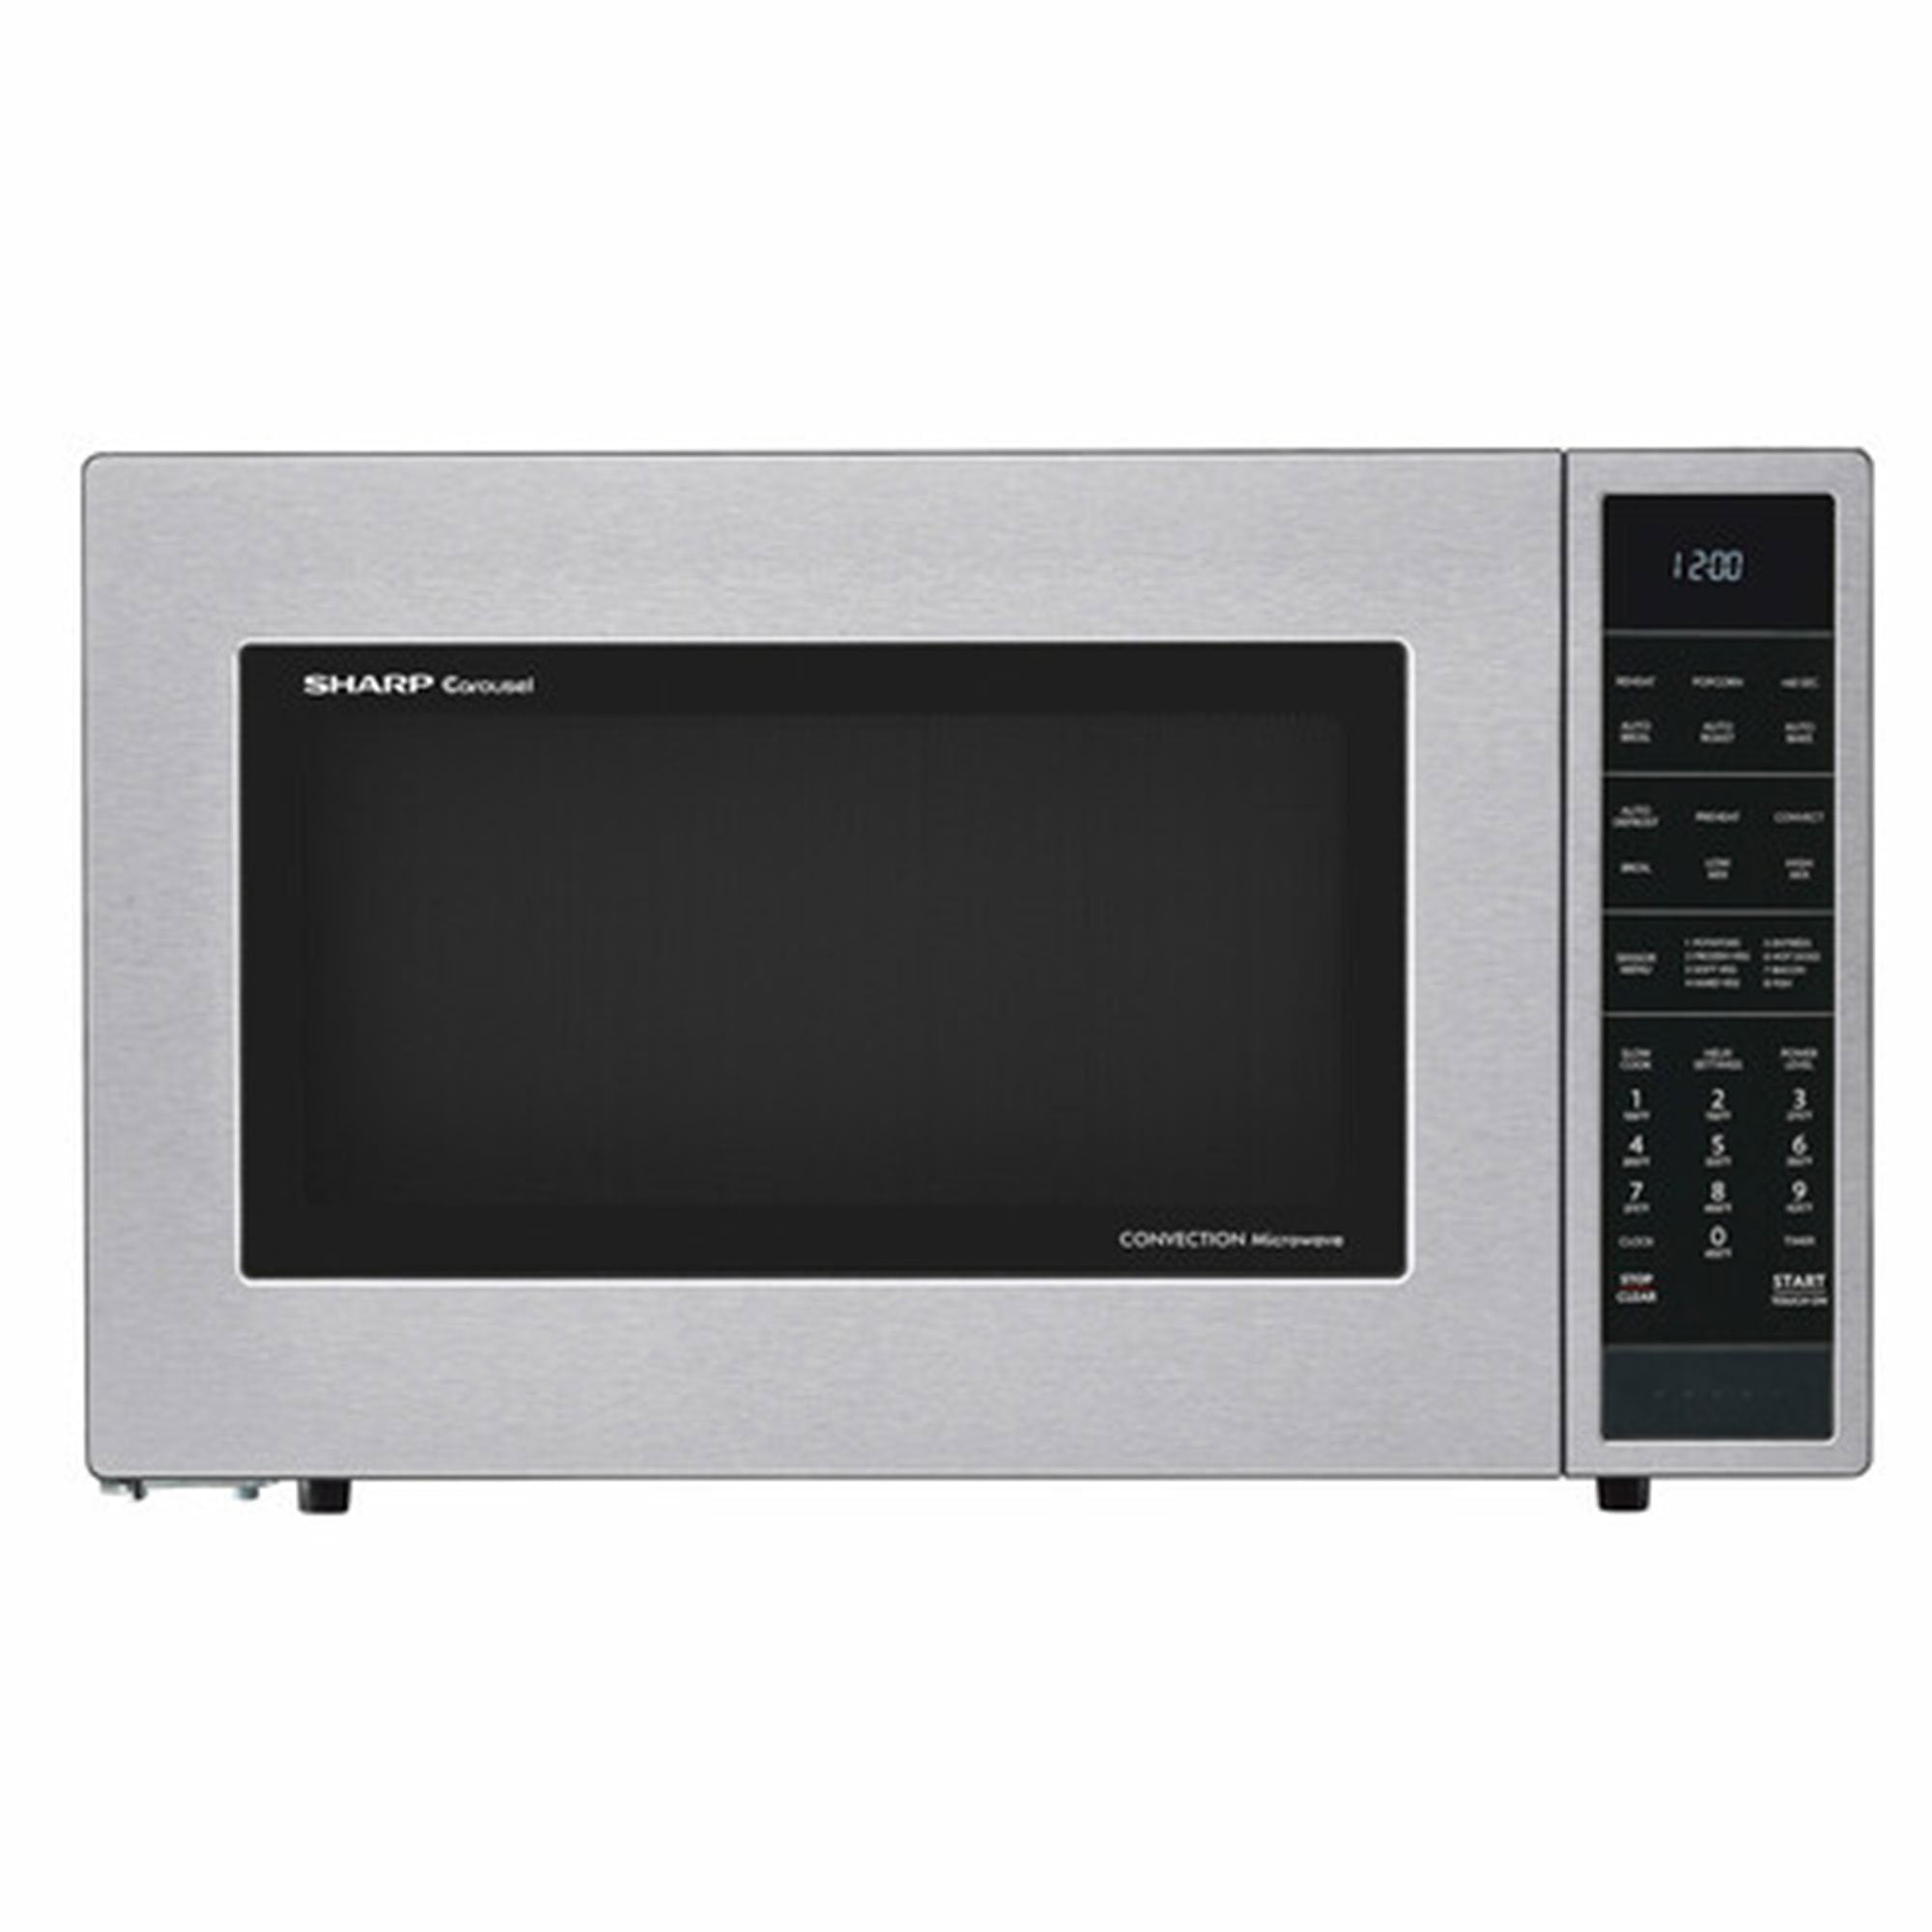 Sharp SMC1585BS 1.5 CF 900W Stainless Steel Carousel Convection Microwave Oven - Certified Refurbished